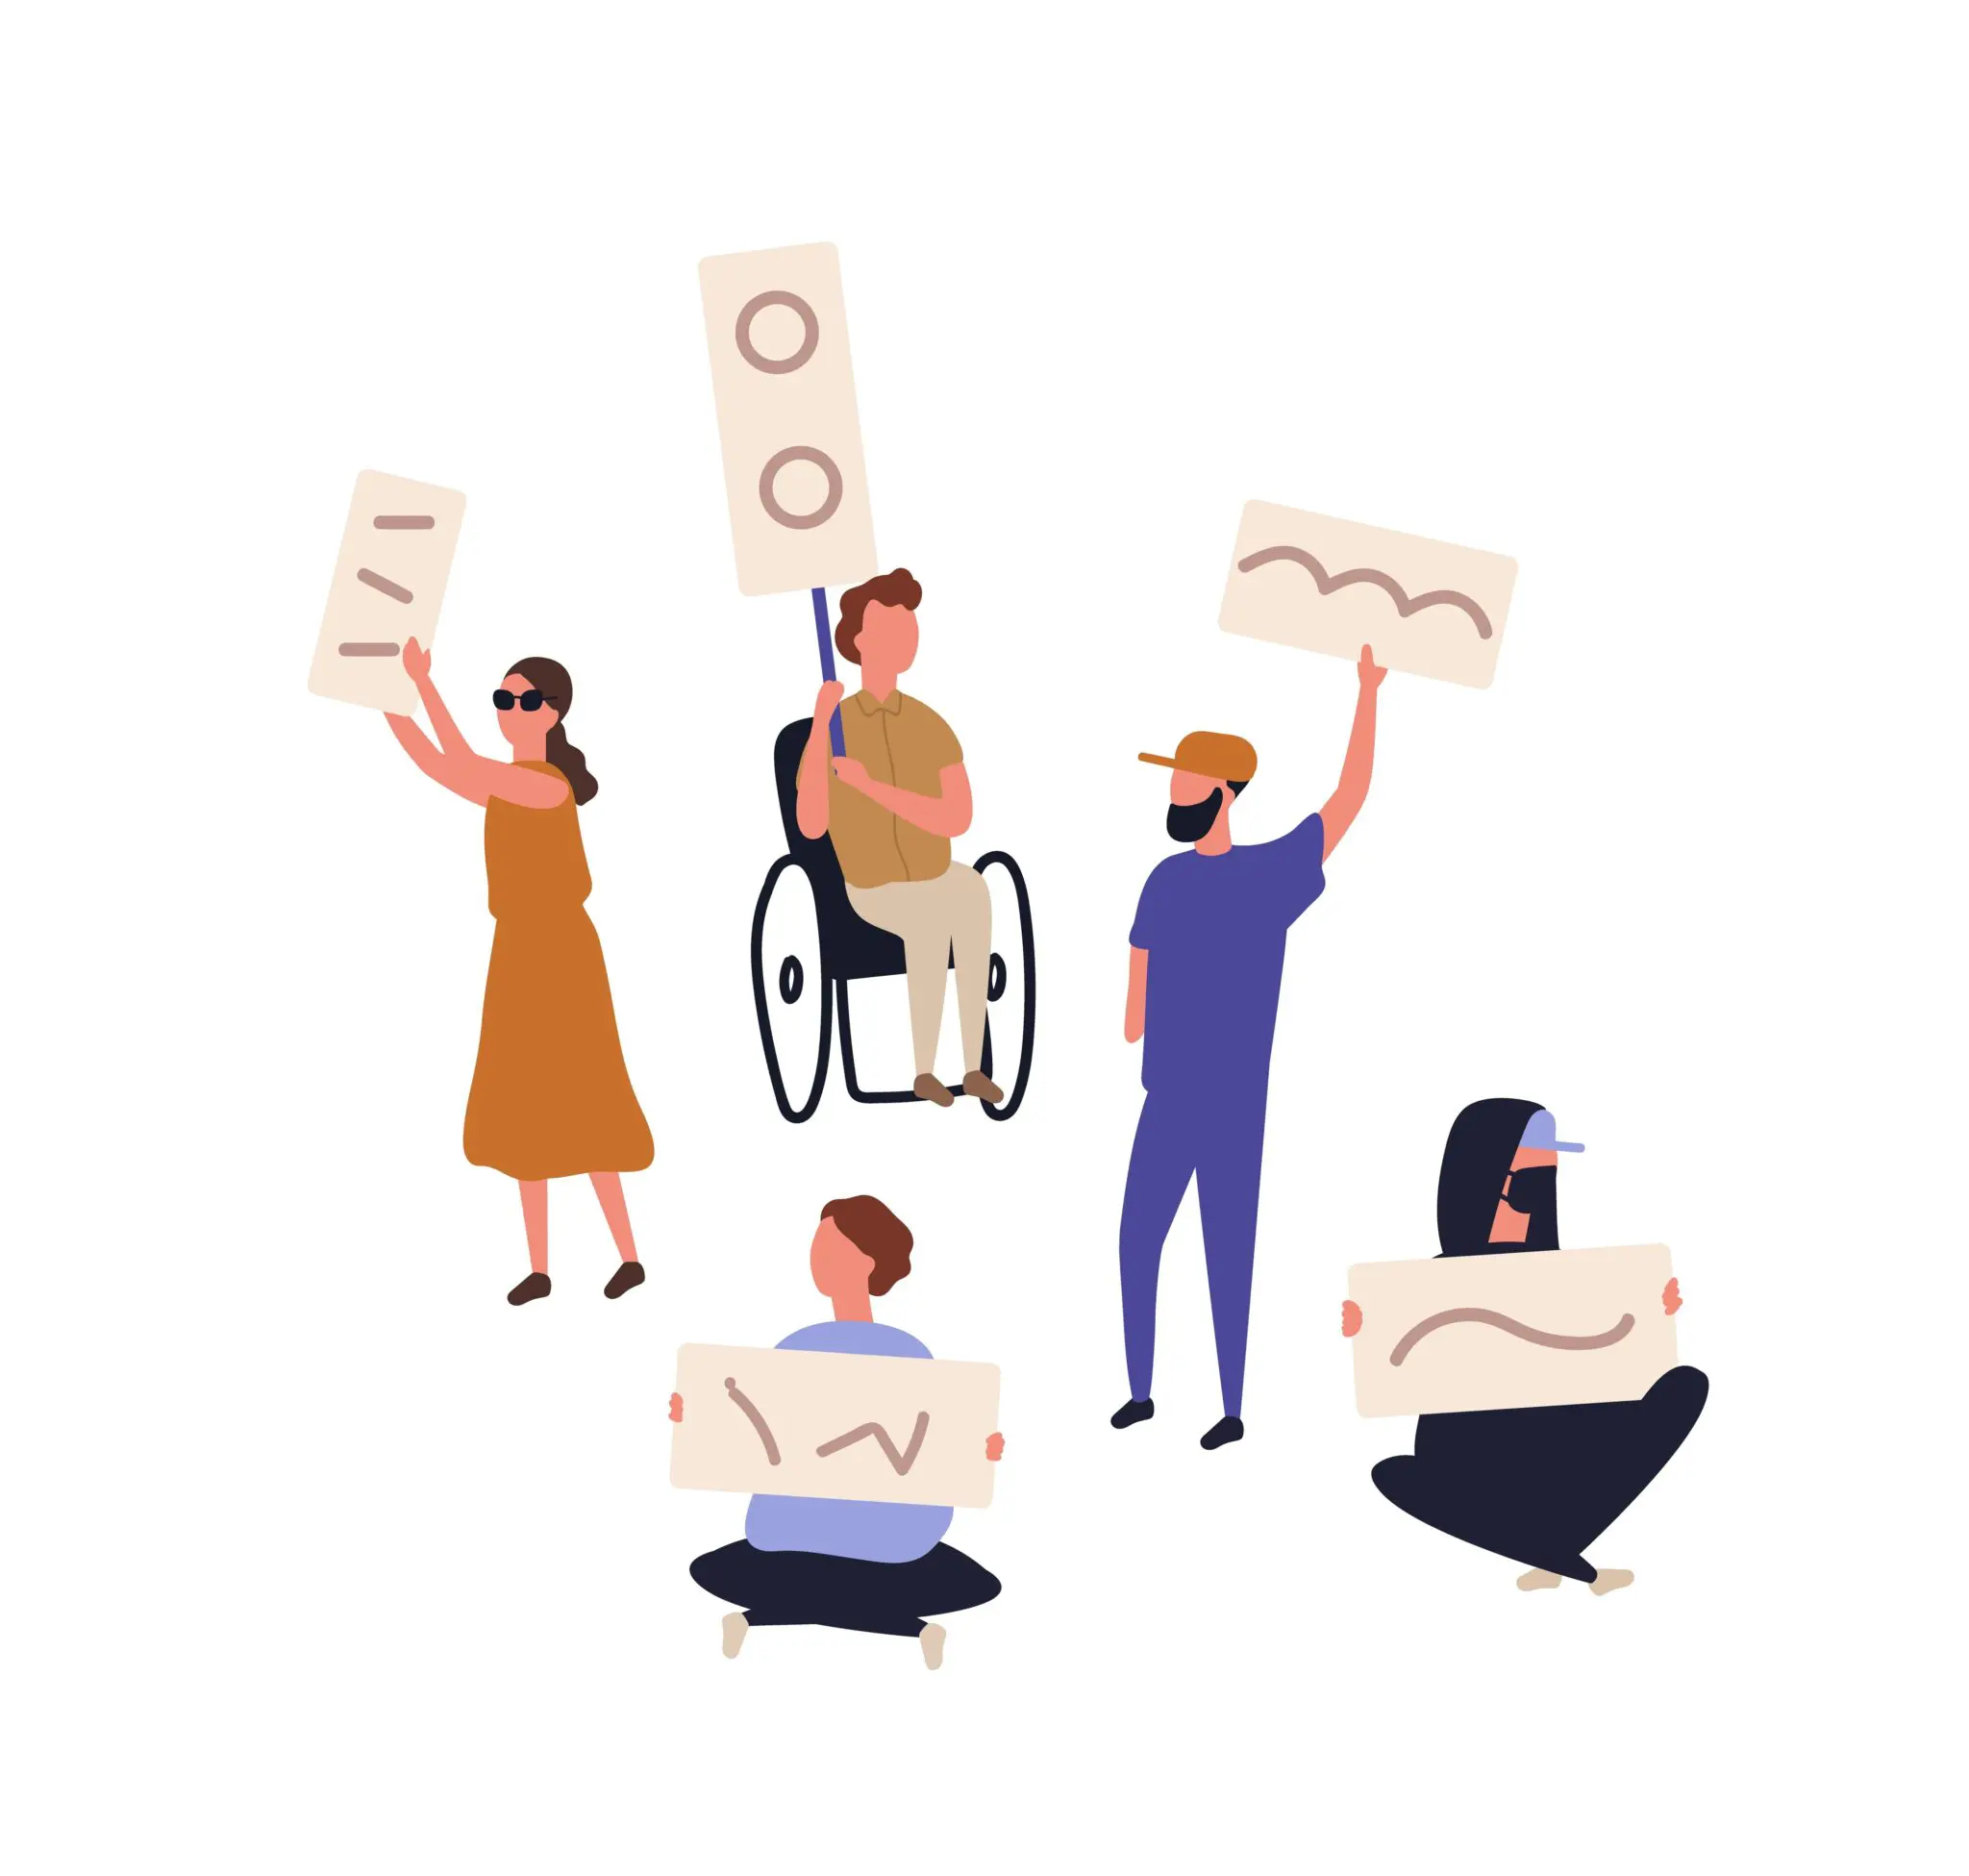 Bundle of protesters holding banners and placards. Set of people taking part in picketing, mass meeting, rally, political protest movement. Protesting men and women. Flat cartoon vector illustration